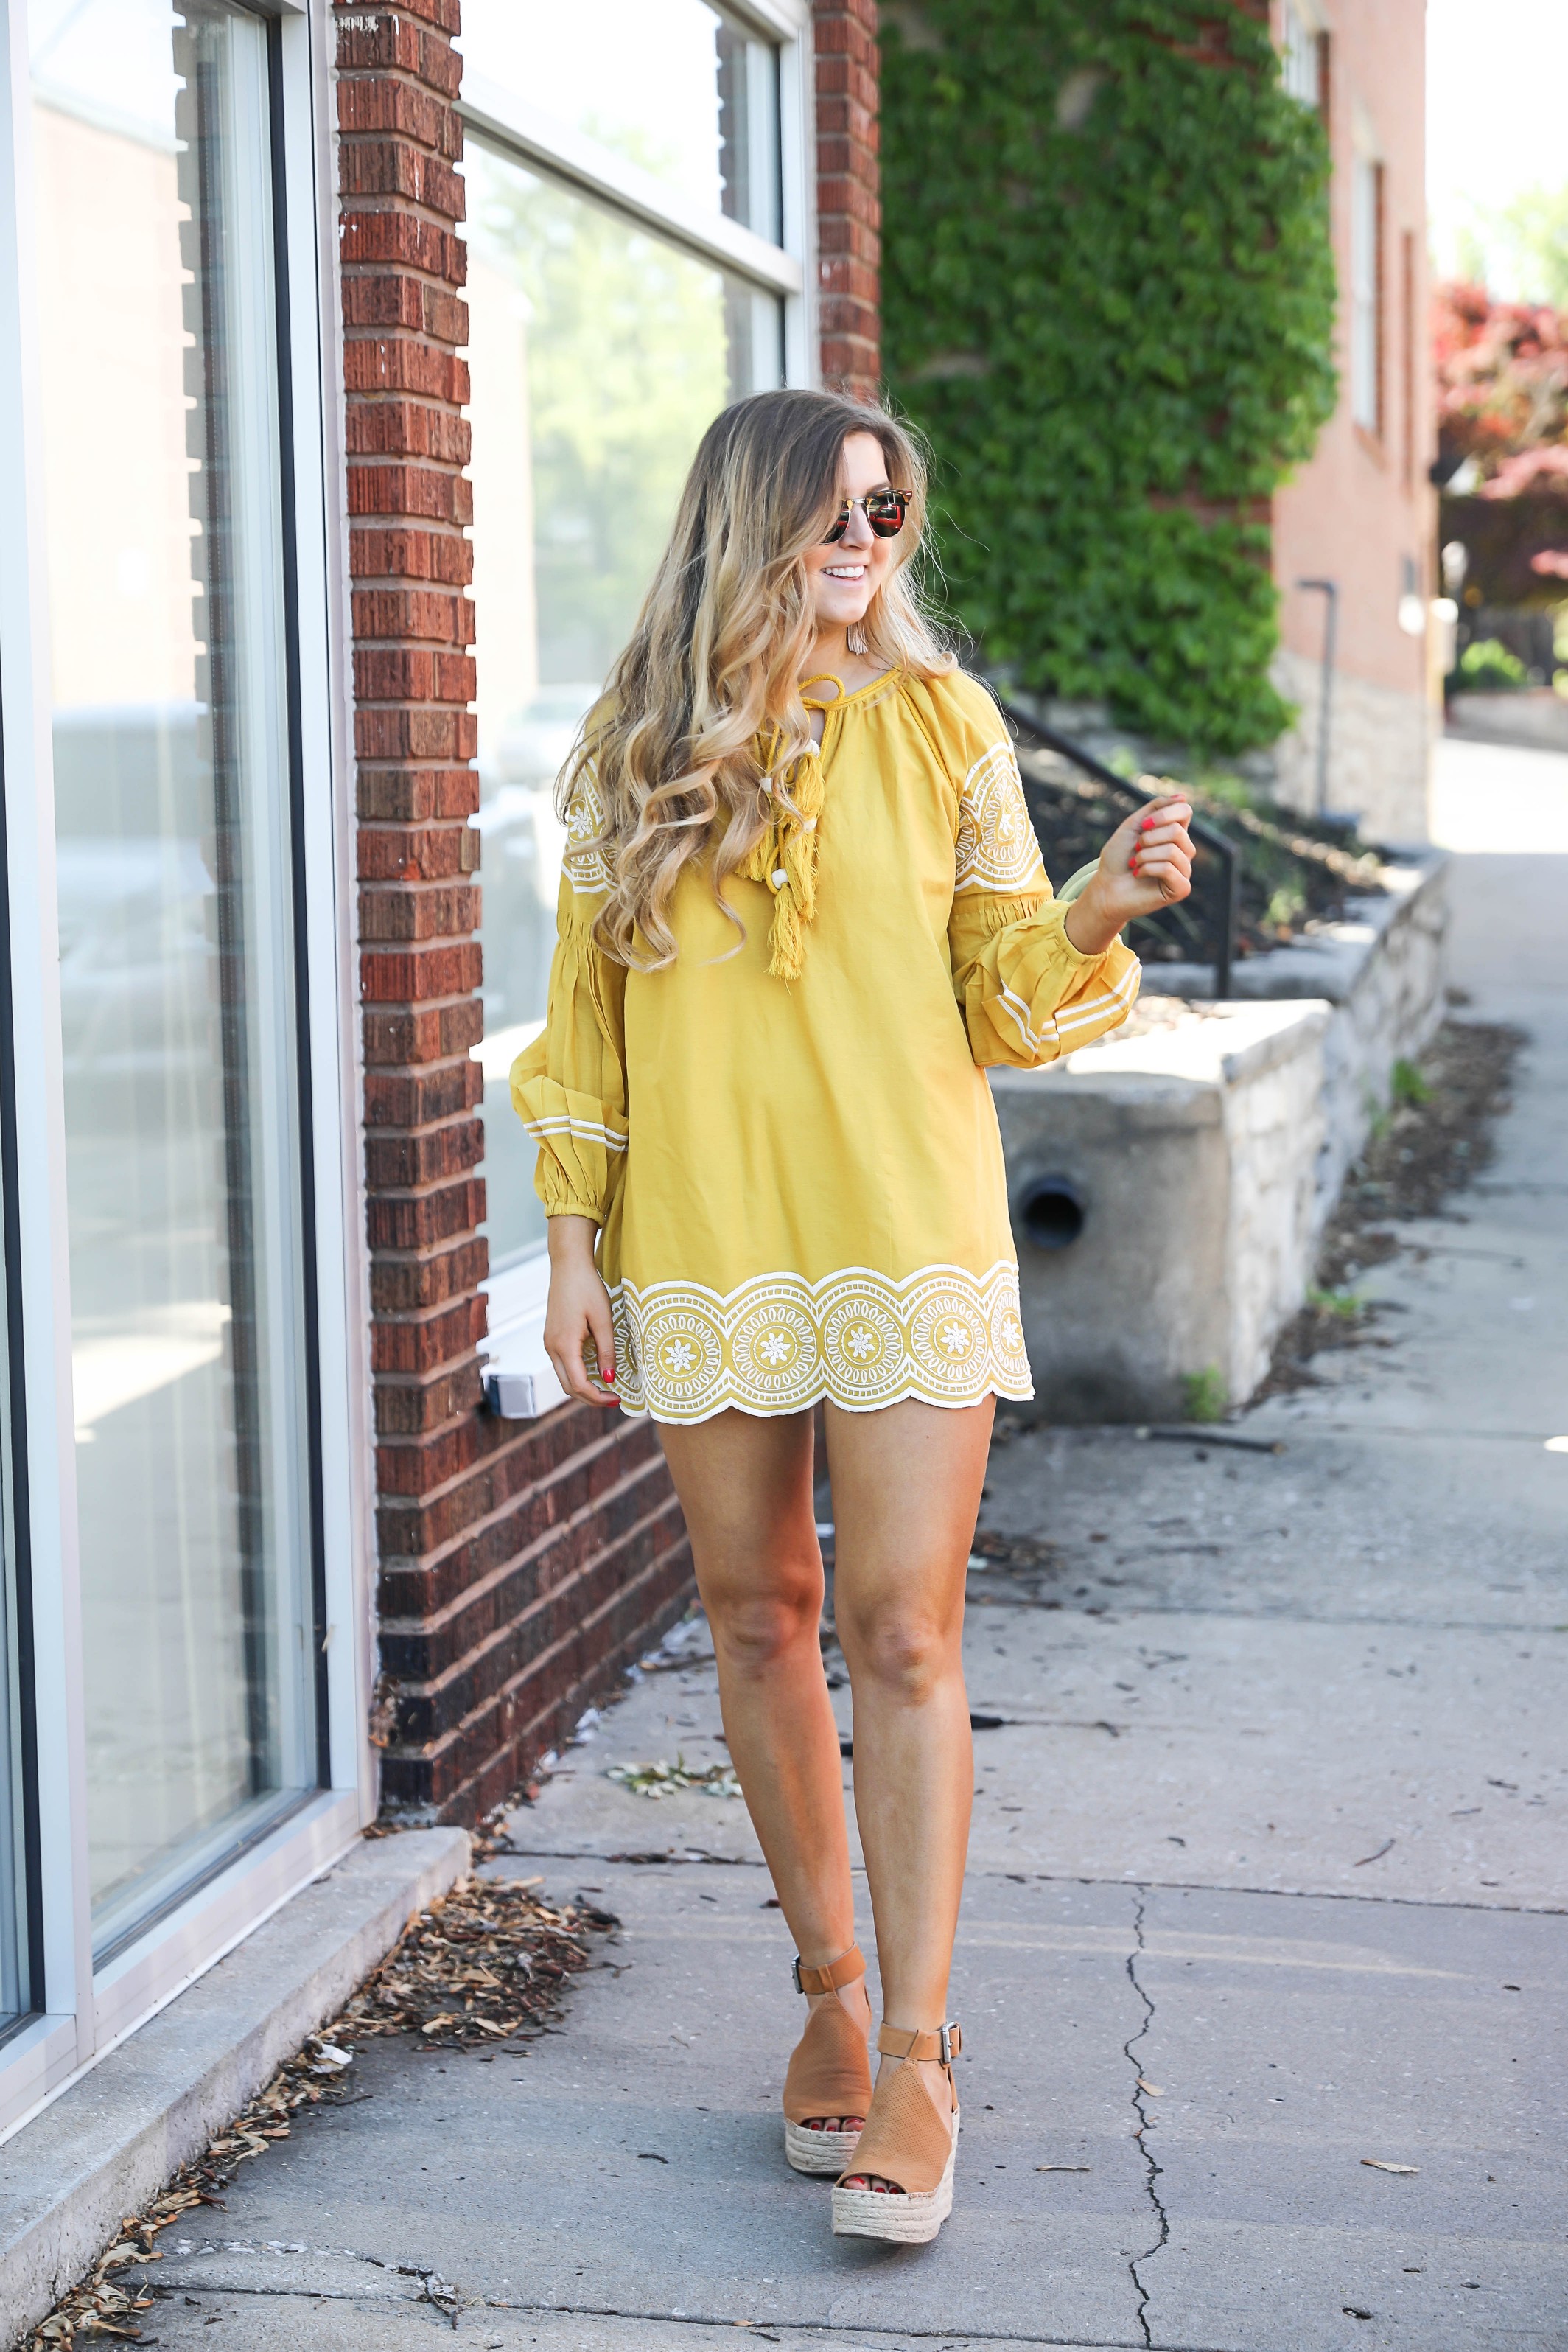 Fun yellow and white embroidered dress on fashion blog daily dose of charm by lauren lindmark dailydoseofcharm.com